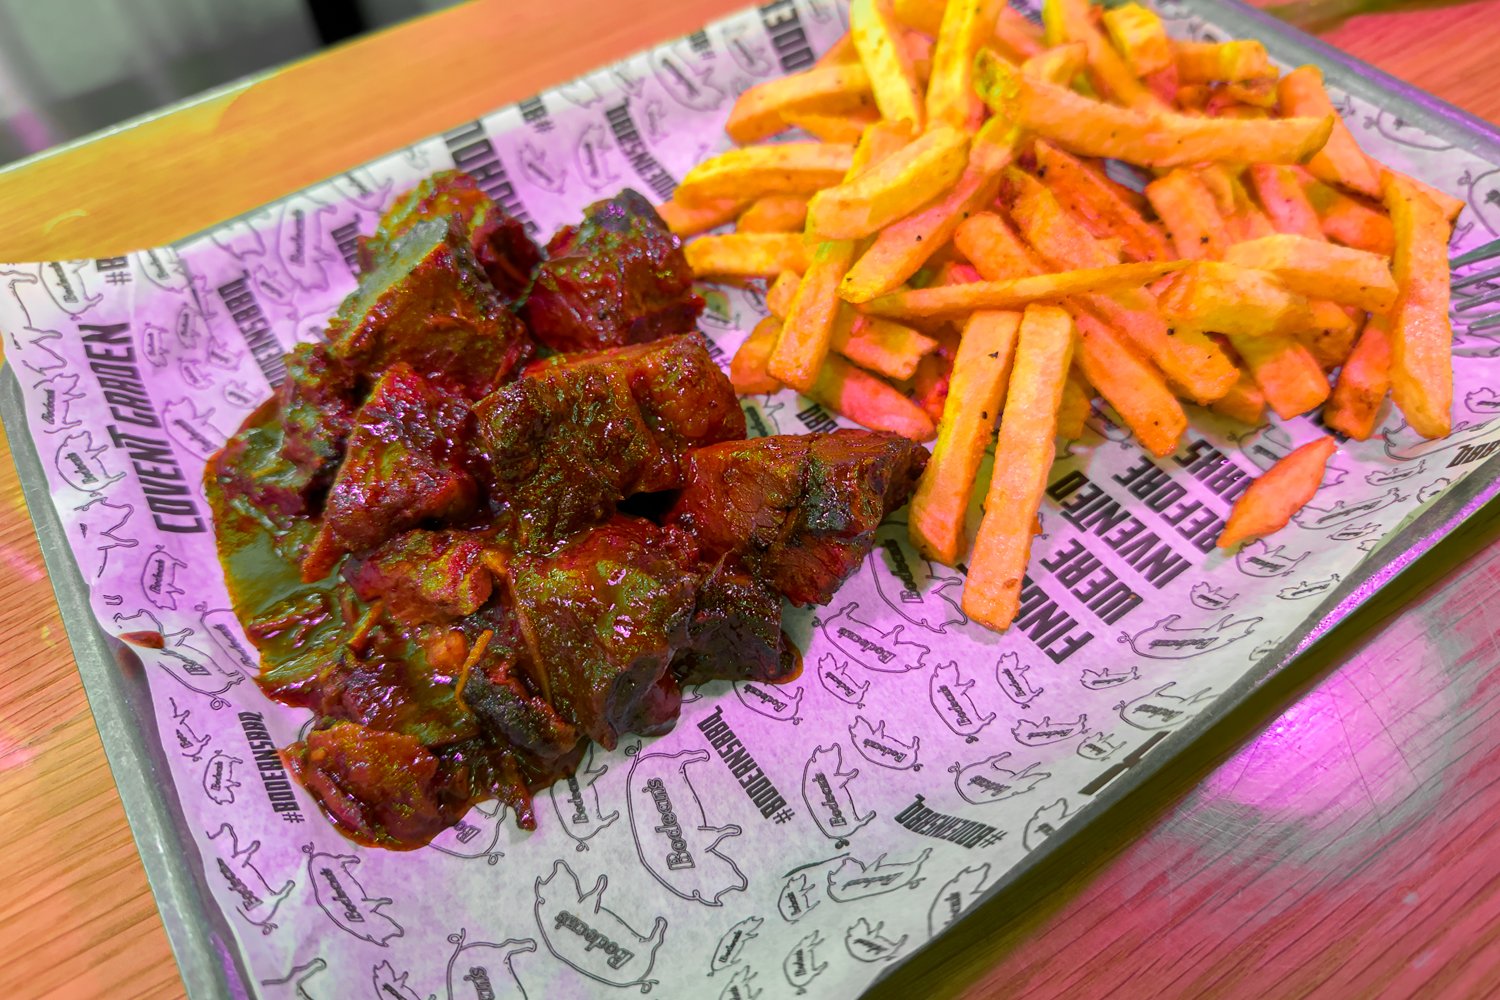  Beef burnt ends: A bit too much sauce on the beef but the chips were decent. 